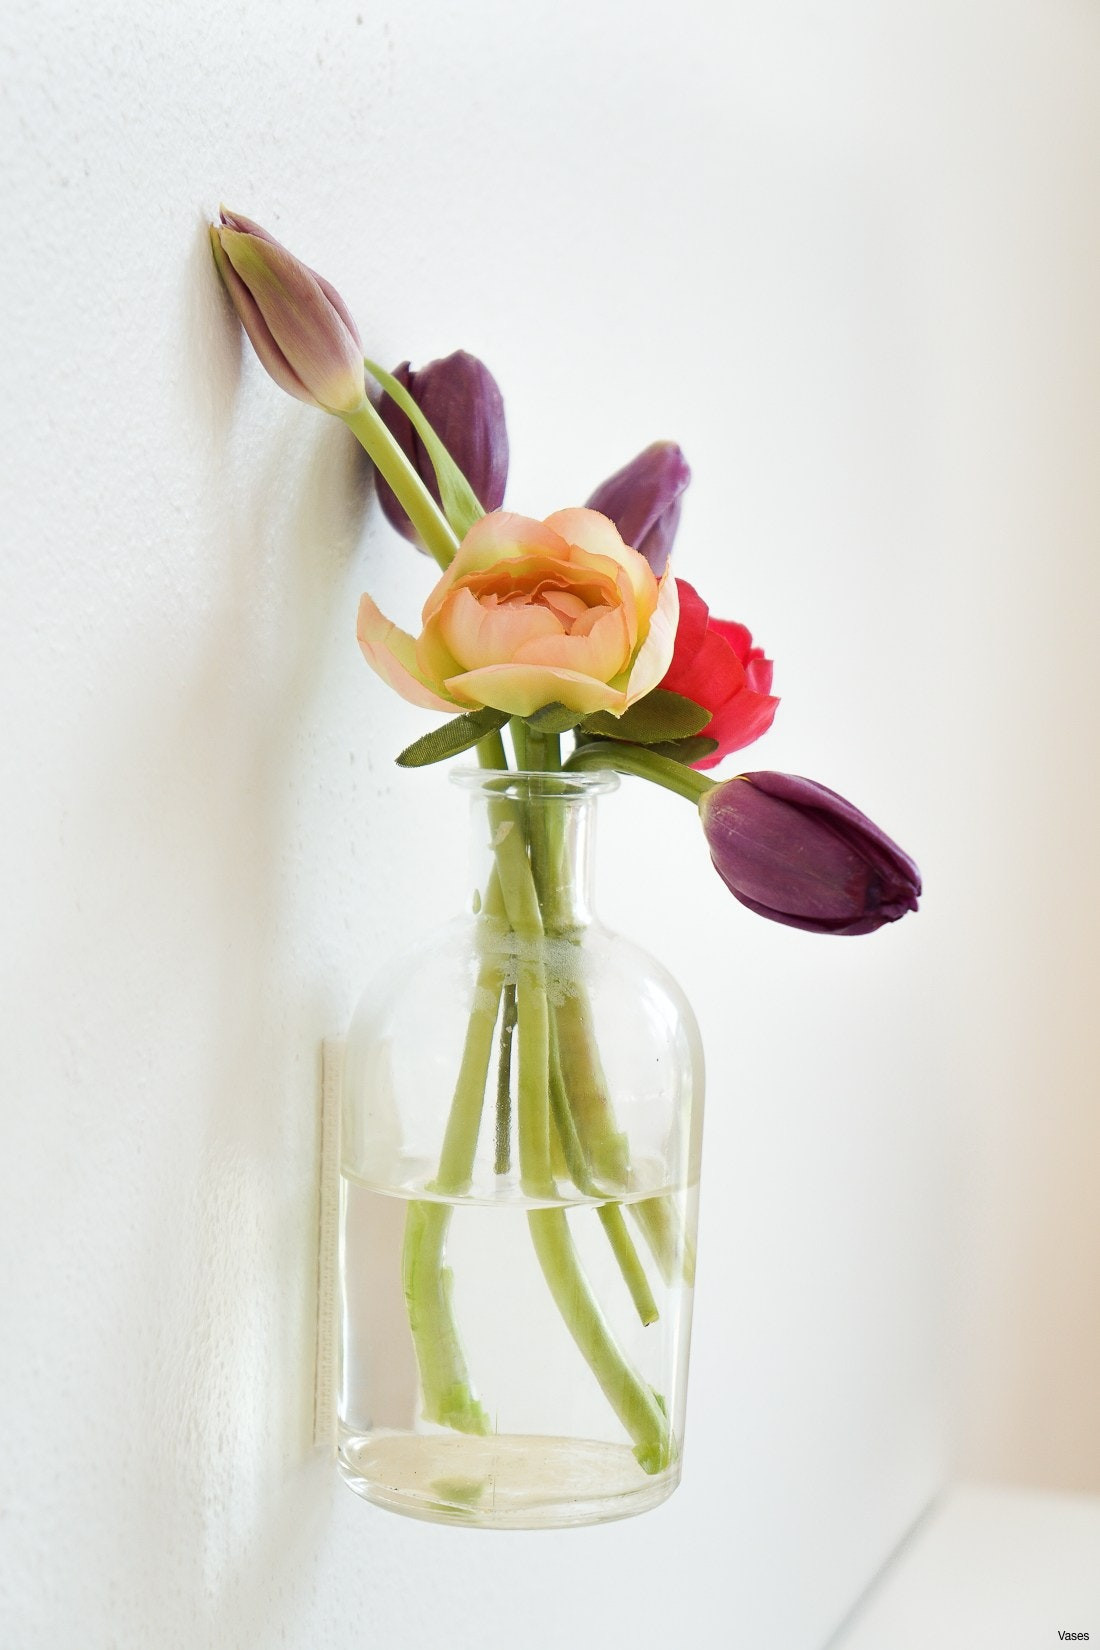 21 Recommended Flowers without Vase 2024 free download flowers without vase of il fullxfull l7e9h vases wall flower vase zoomi 0d decor inspiration pertaining to il fullxfull l7e9h vases wall flower vase zoomi 0d decor inspiration inspiration of